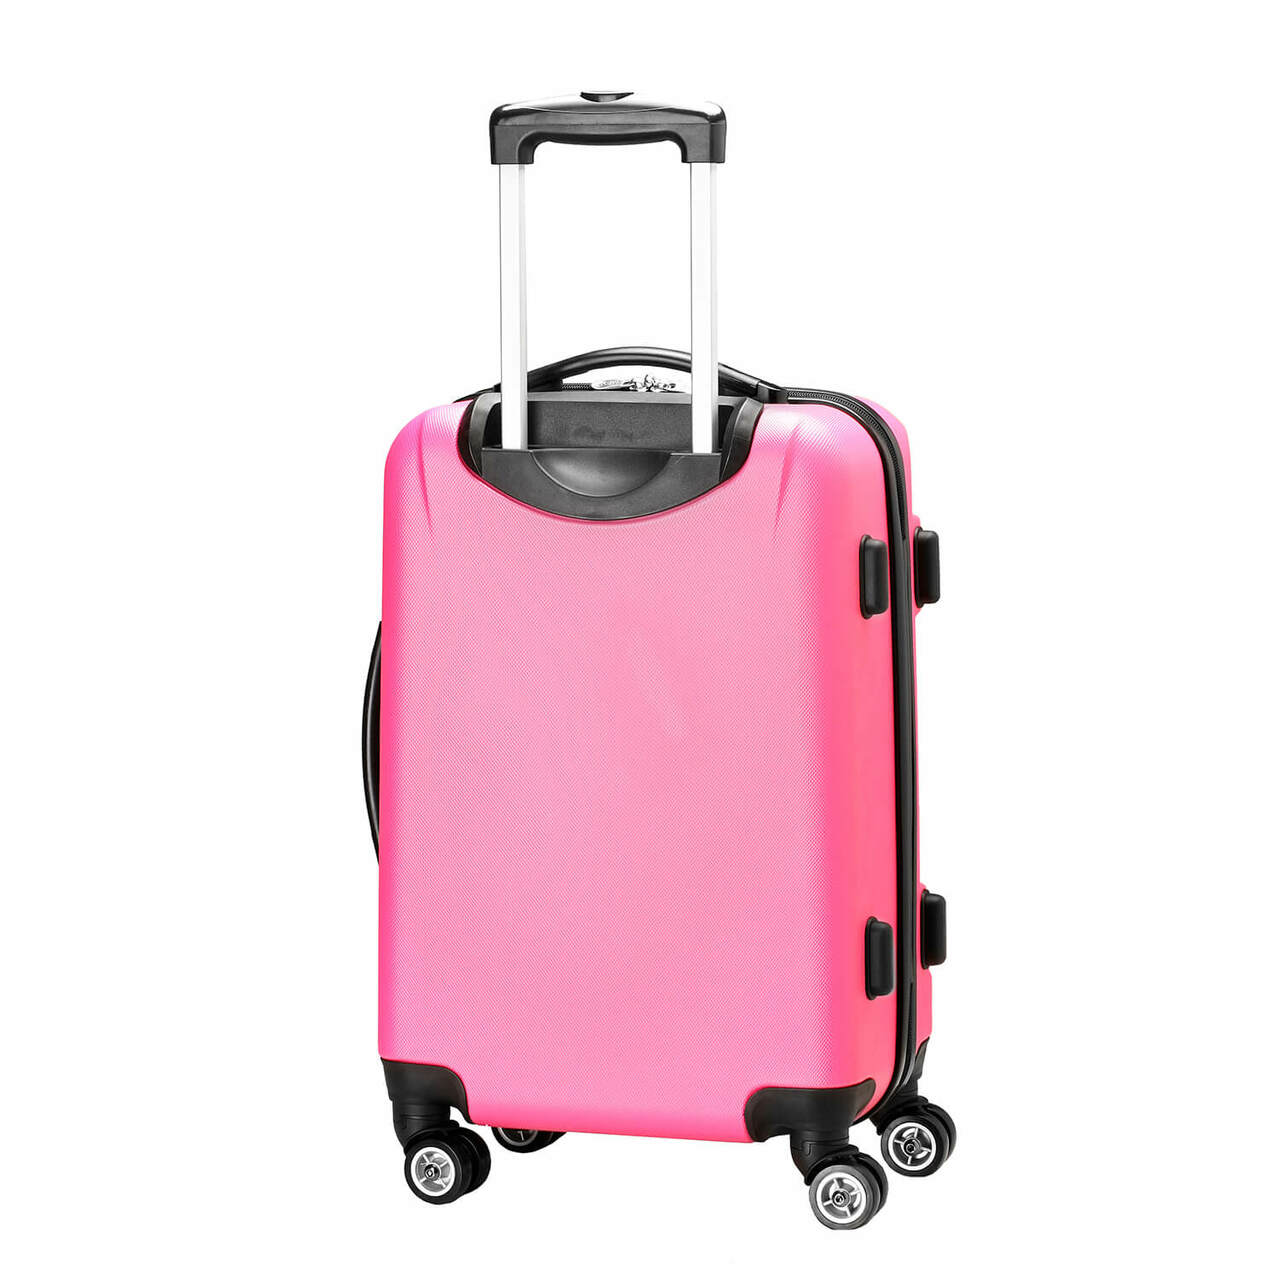 UCLA Bruins 20" Pink Domestic Carry-on Spinner